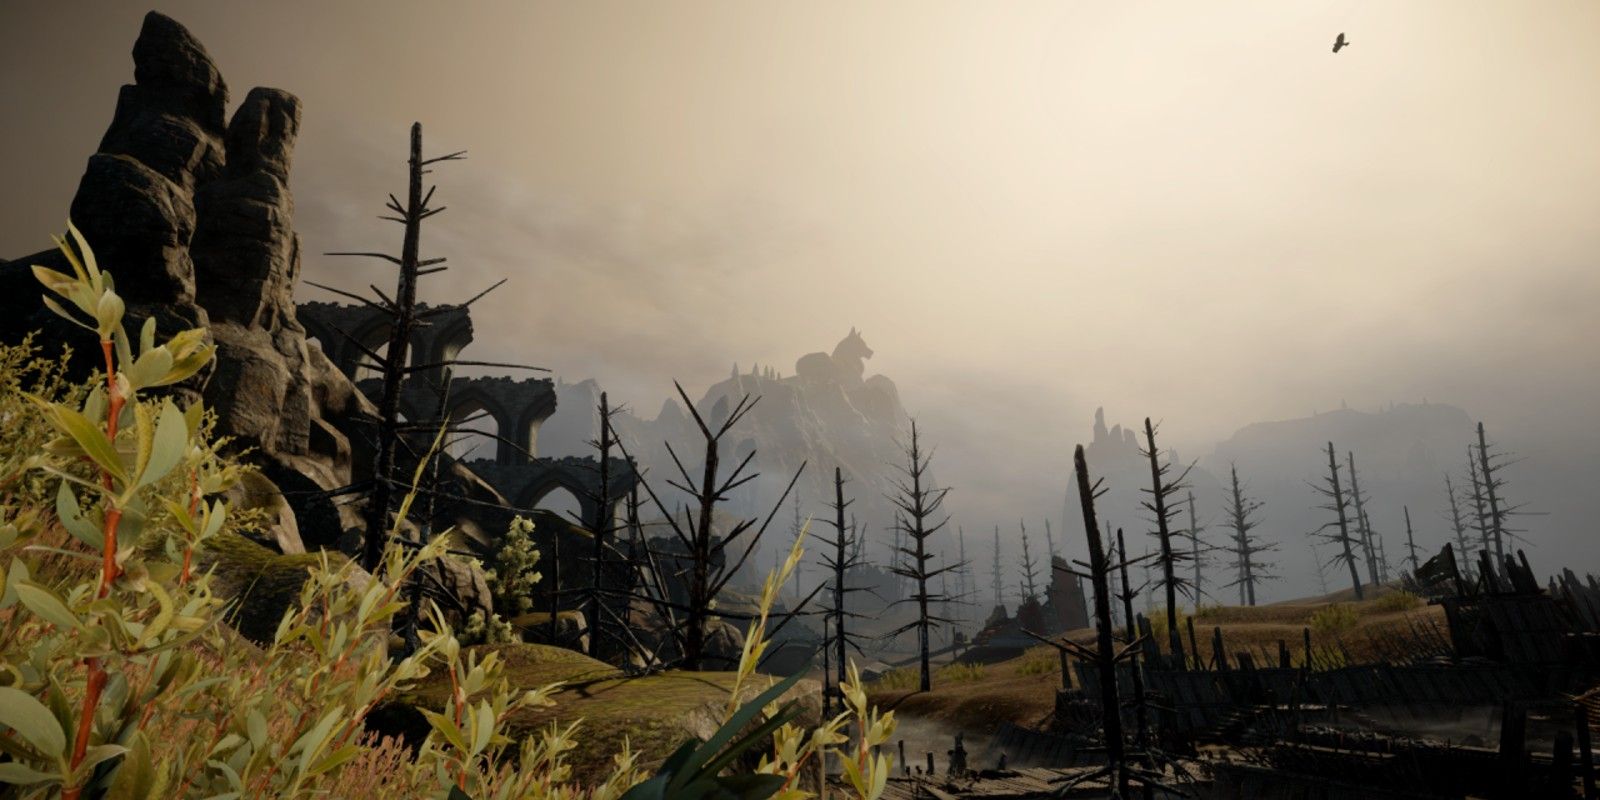 The Exalted Plains region in Dragon Age: Inquisition